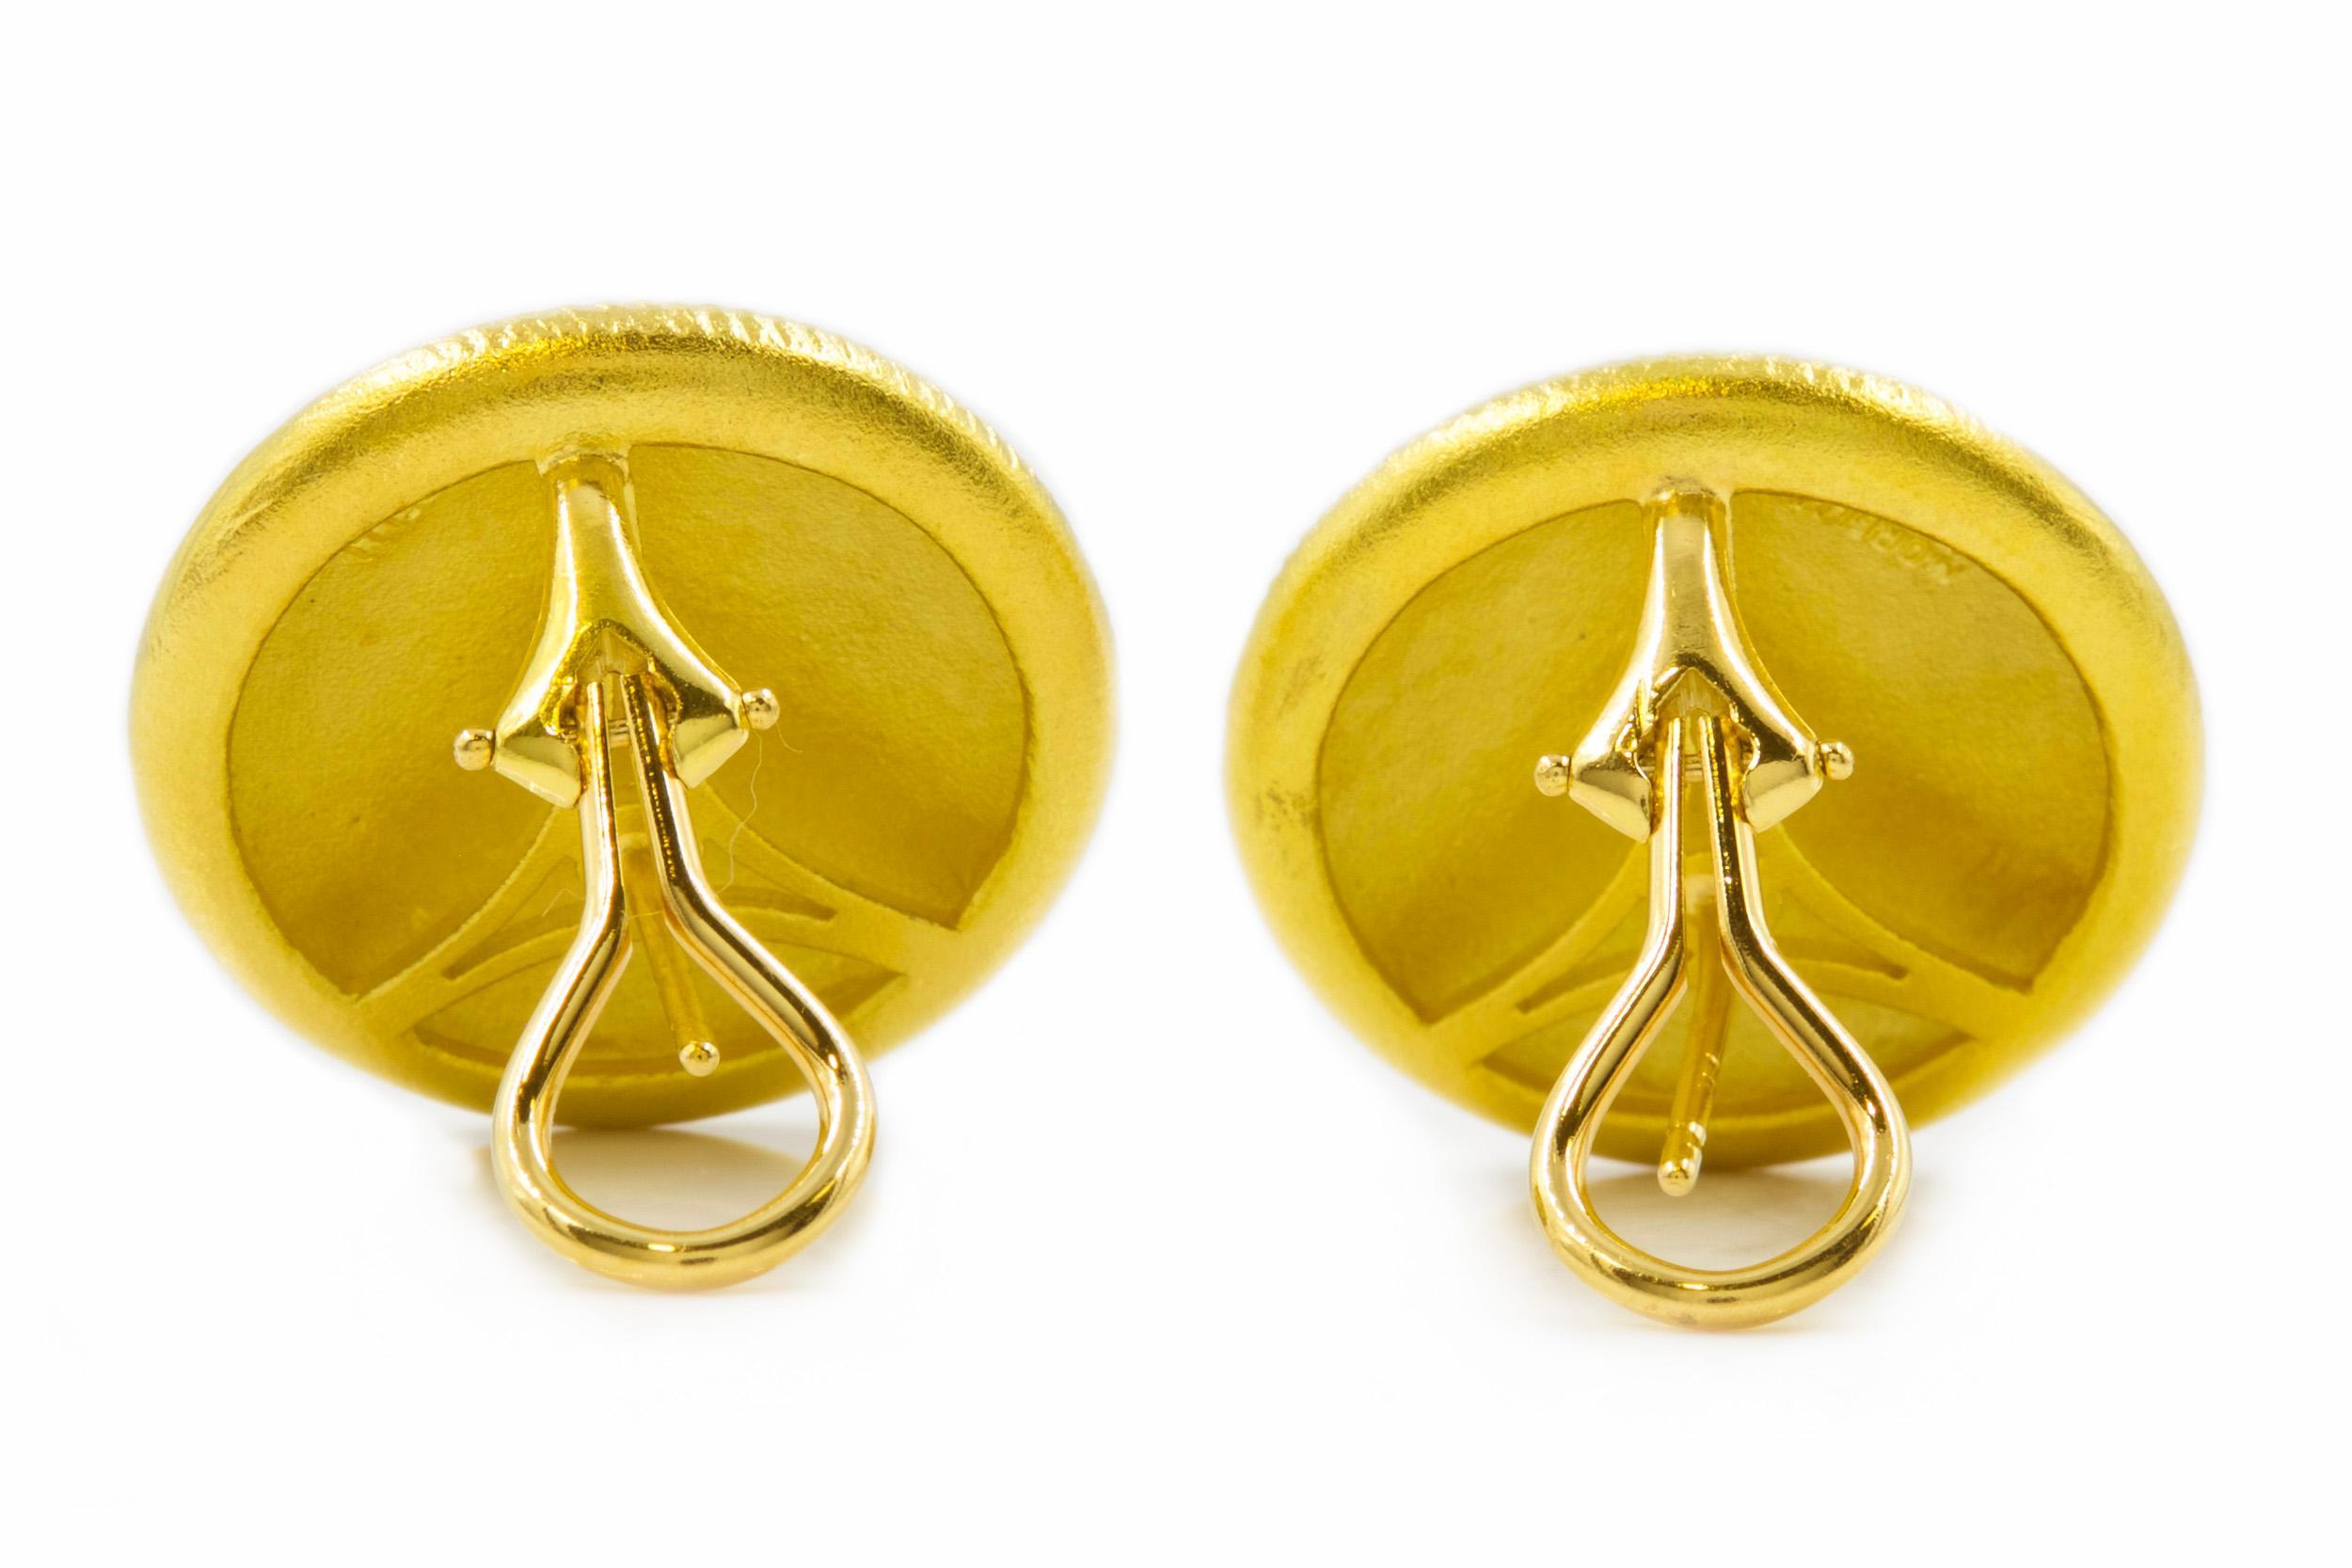 Pair of Ribbed Textured 18k Yellow Gold Round Circular Earrings by Paul Morelli 1